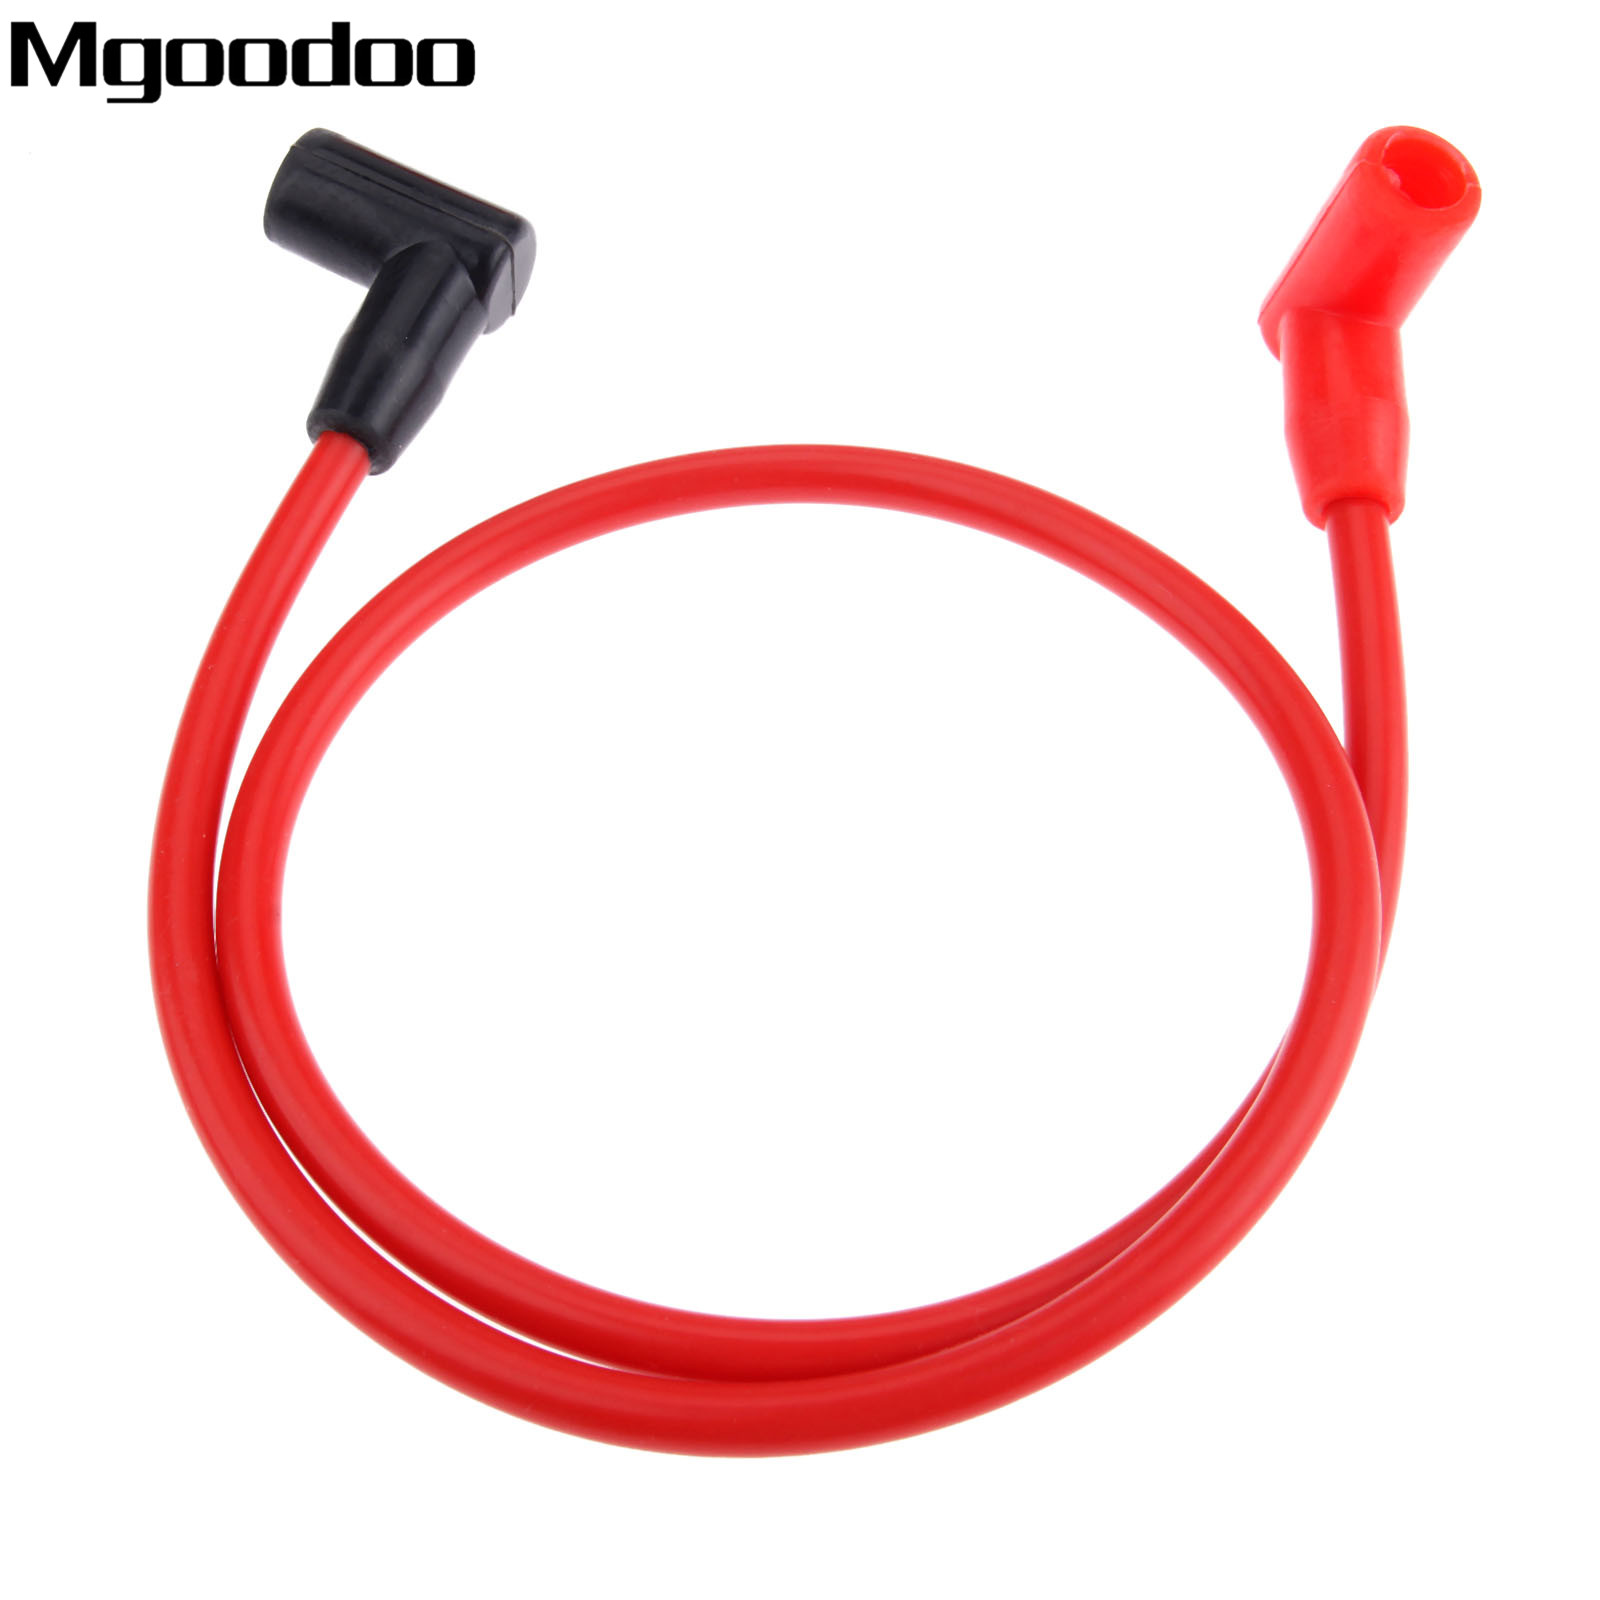 Mgoodoo 8Pcs Ignition Cable Spark Plug Wires 8mm For ACC-5048R Fittment For Chevrolet For G M C models Wires Over Valve Covers